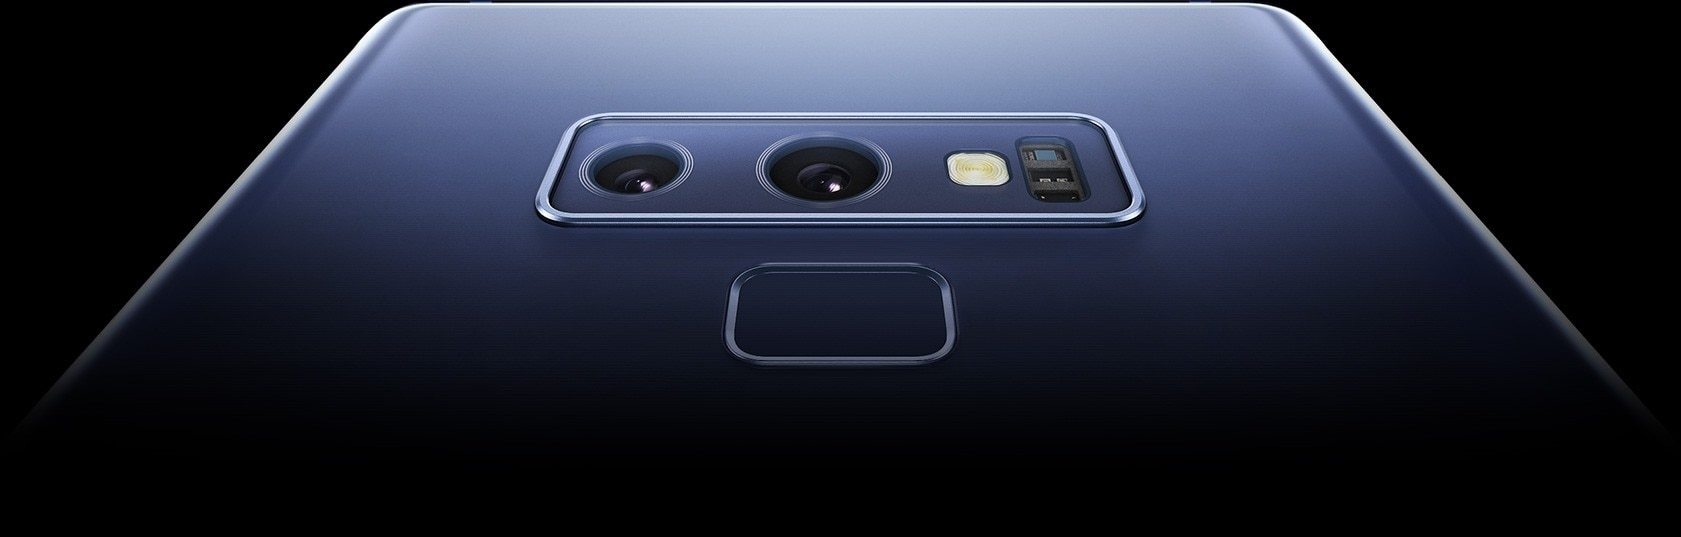 An extreme closeup of Galaxy Note9âs dual lens rear camera and fingerprint scanner